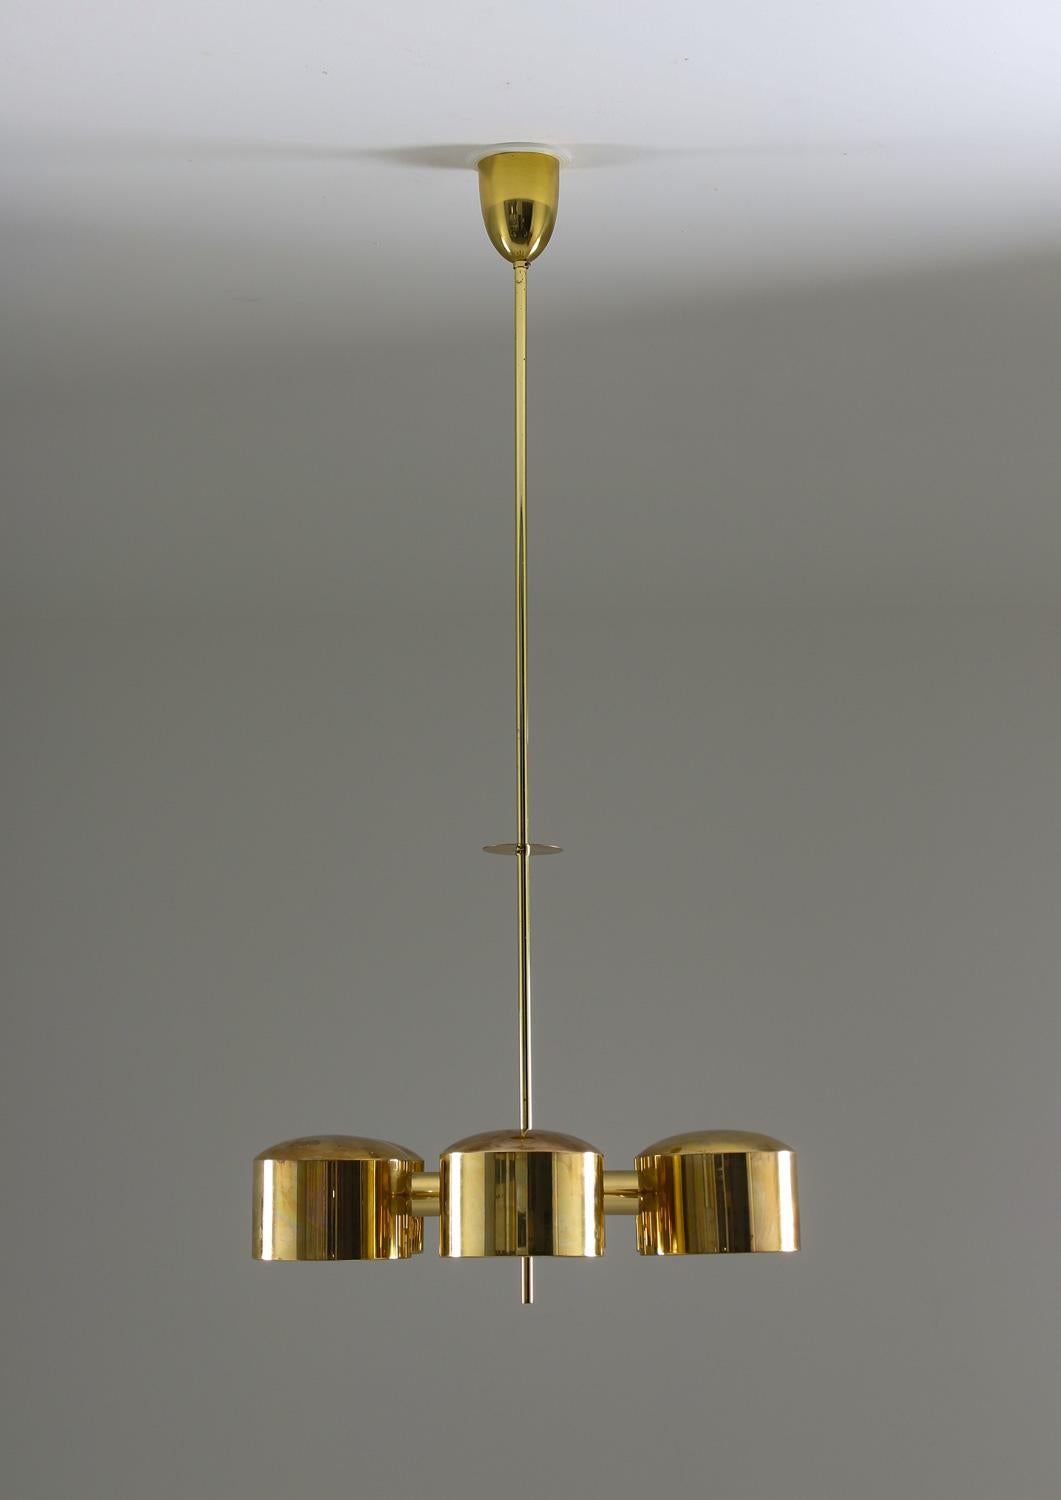 A magnificent and rare chandelier in brass by Hans-Agne Jakobsson, Sweden, 1960s-1970s.

The lamp features six light sources. Each bulb is surrounded by a circular brass shade. The shades are separated by round brass bars, creating a circular